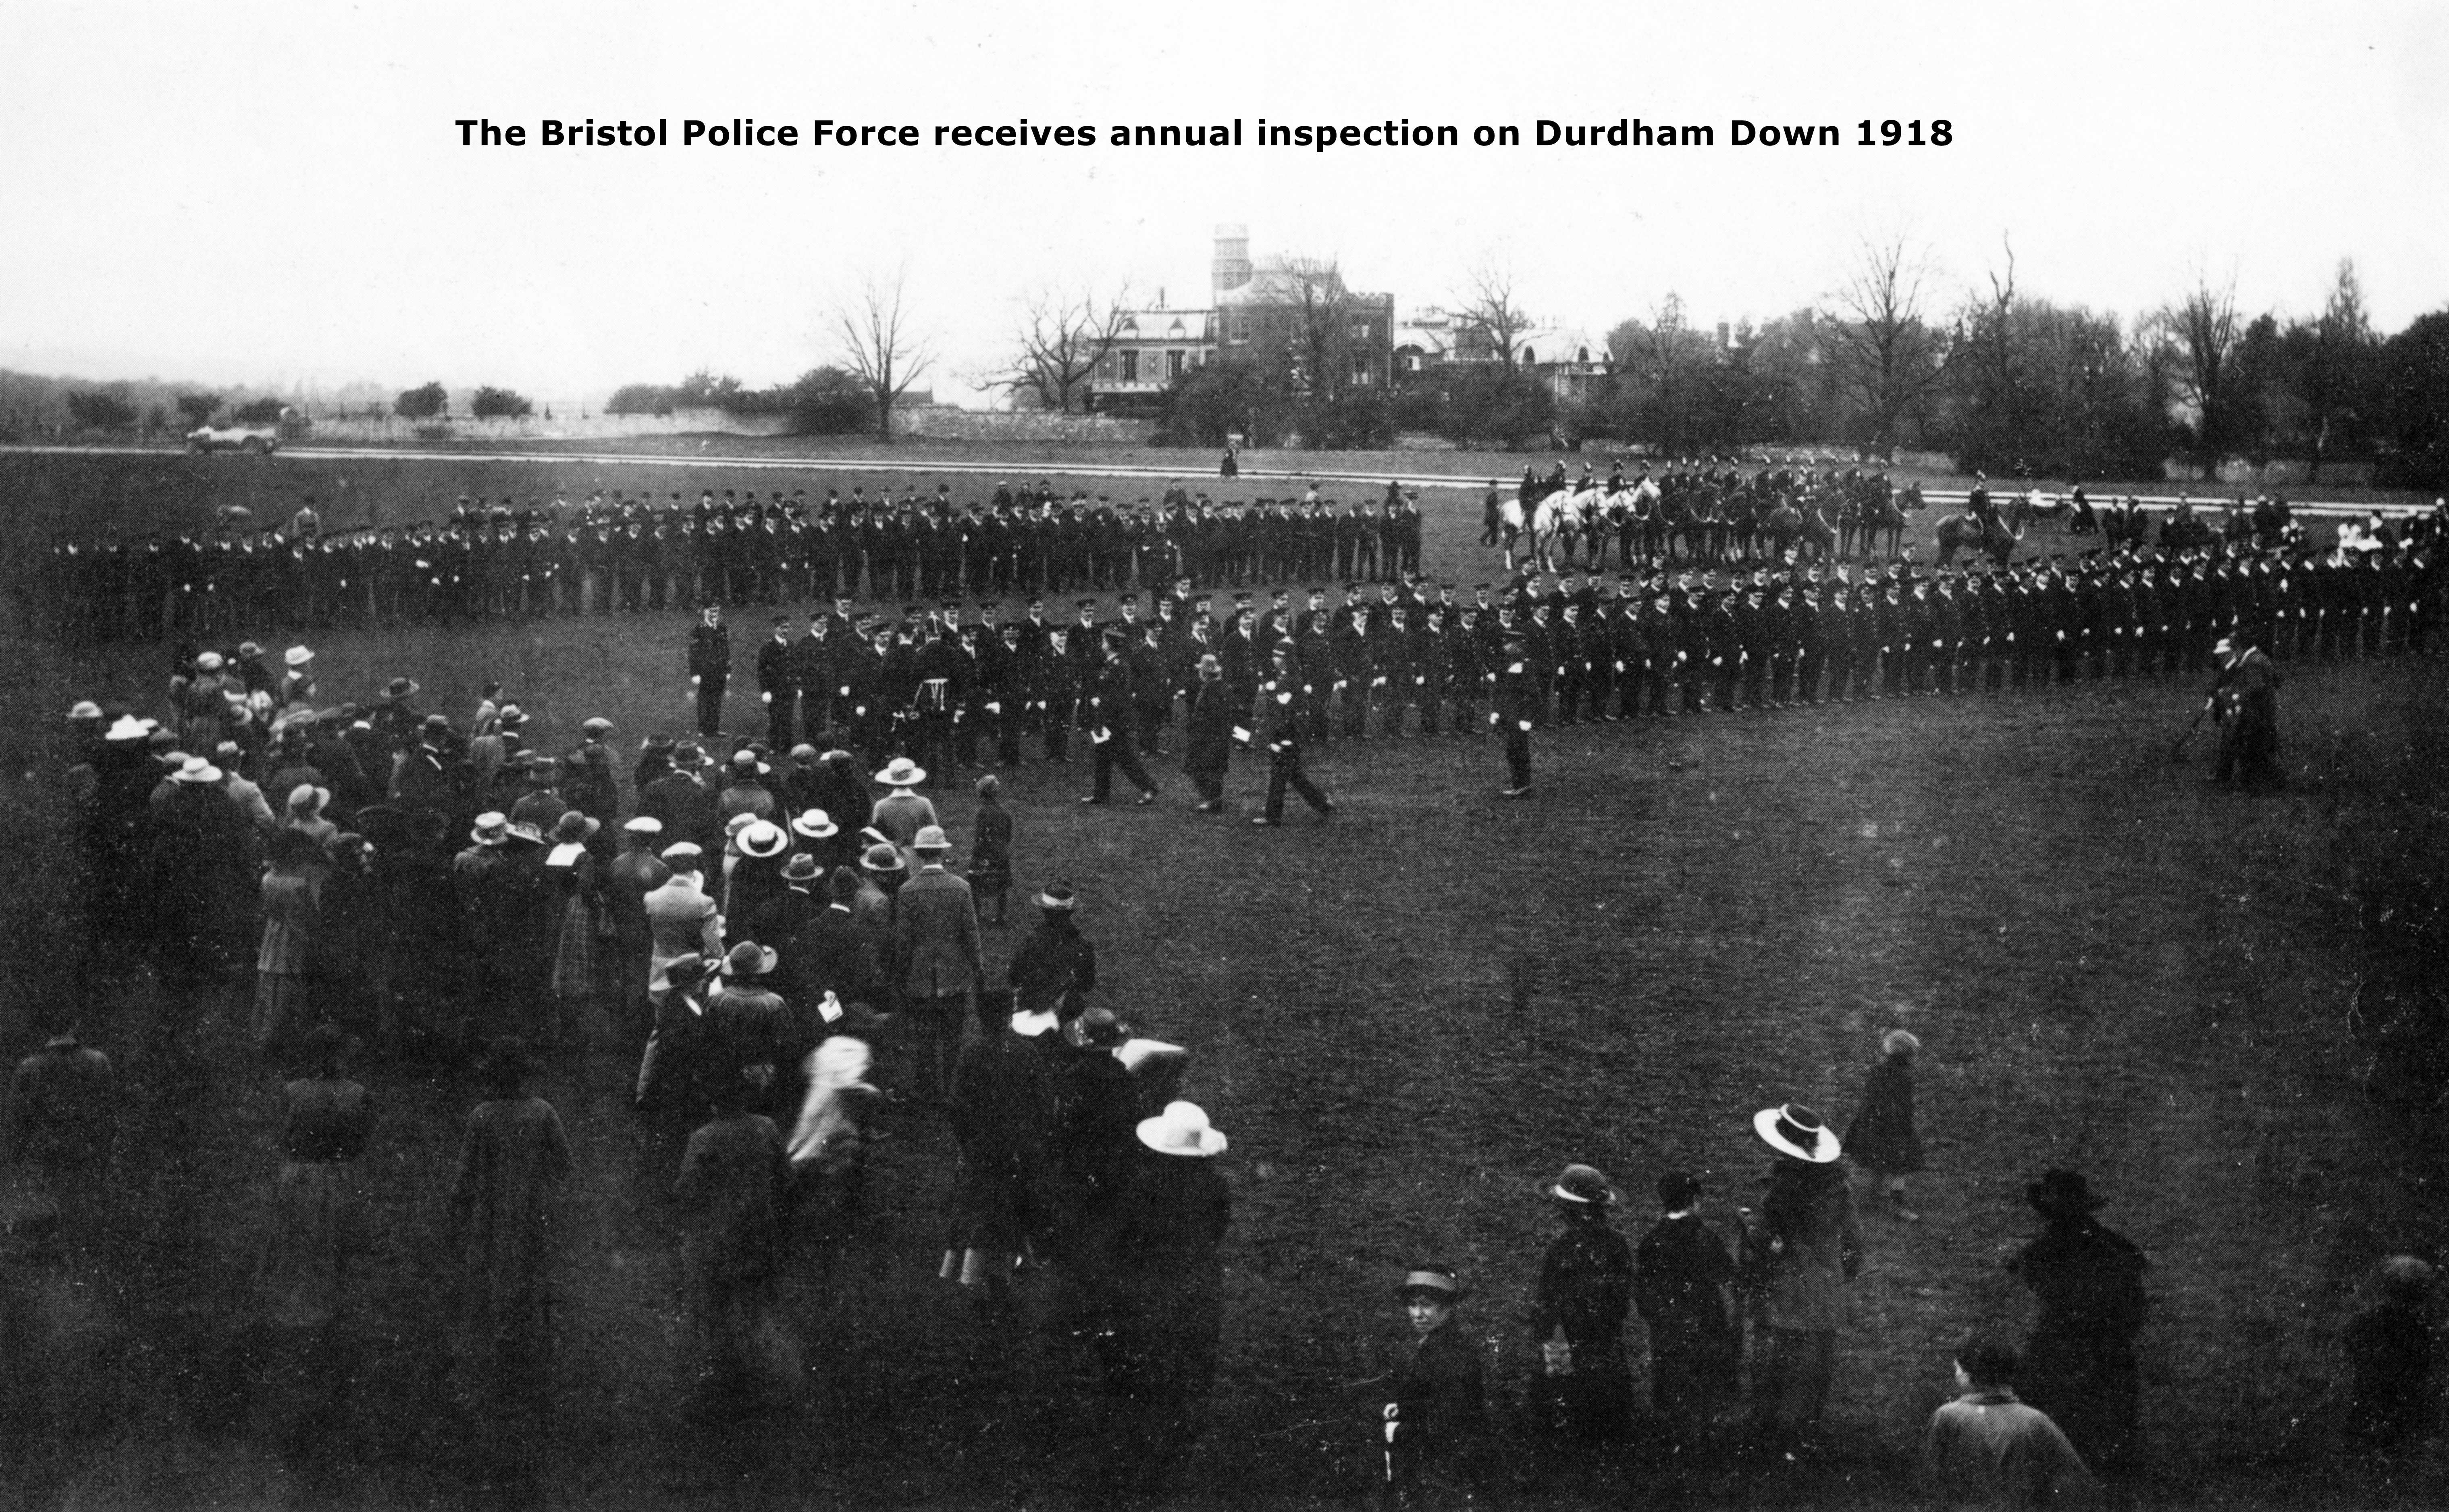 The history of policing Bristol